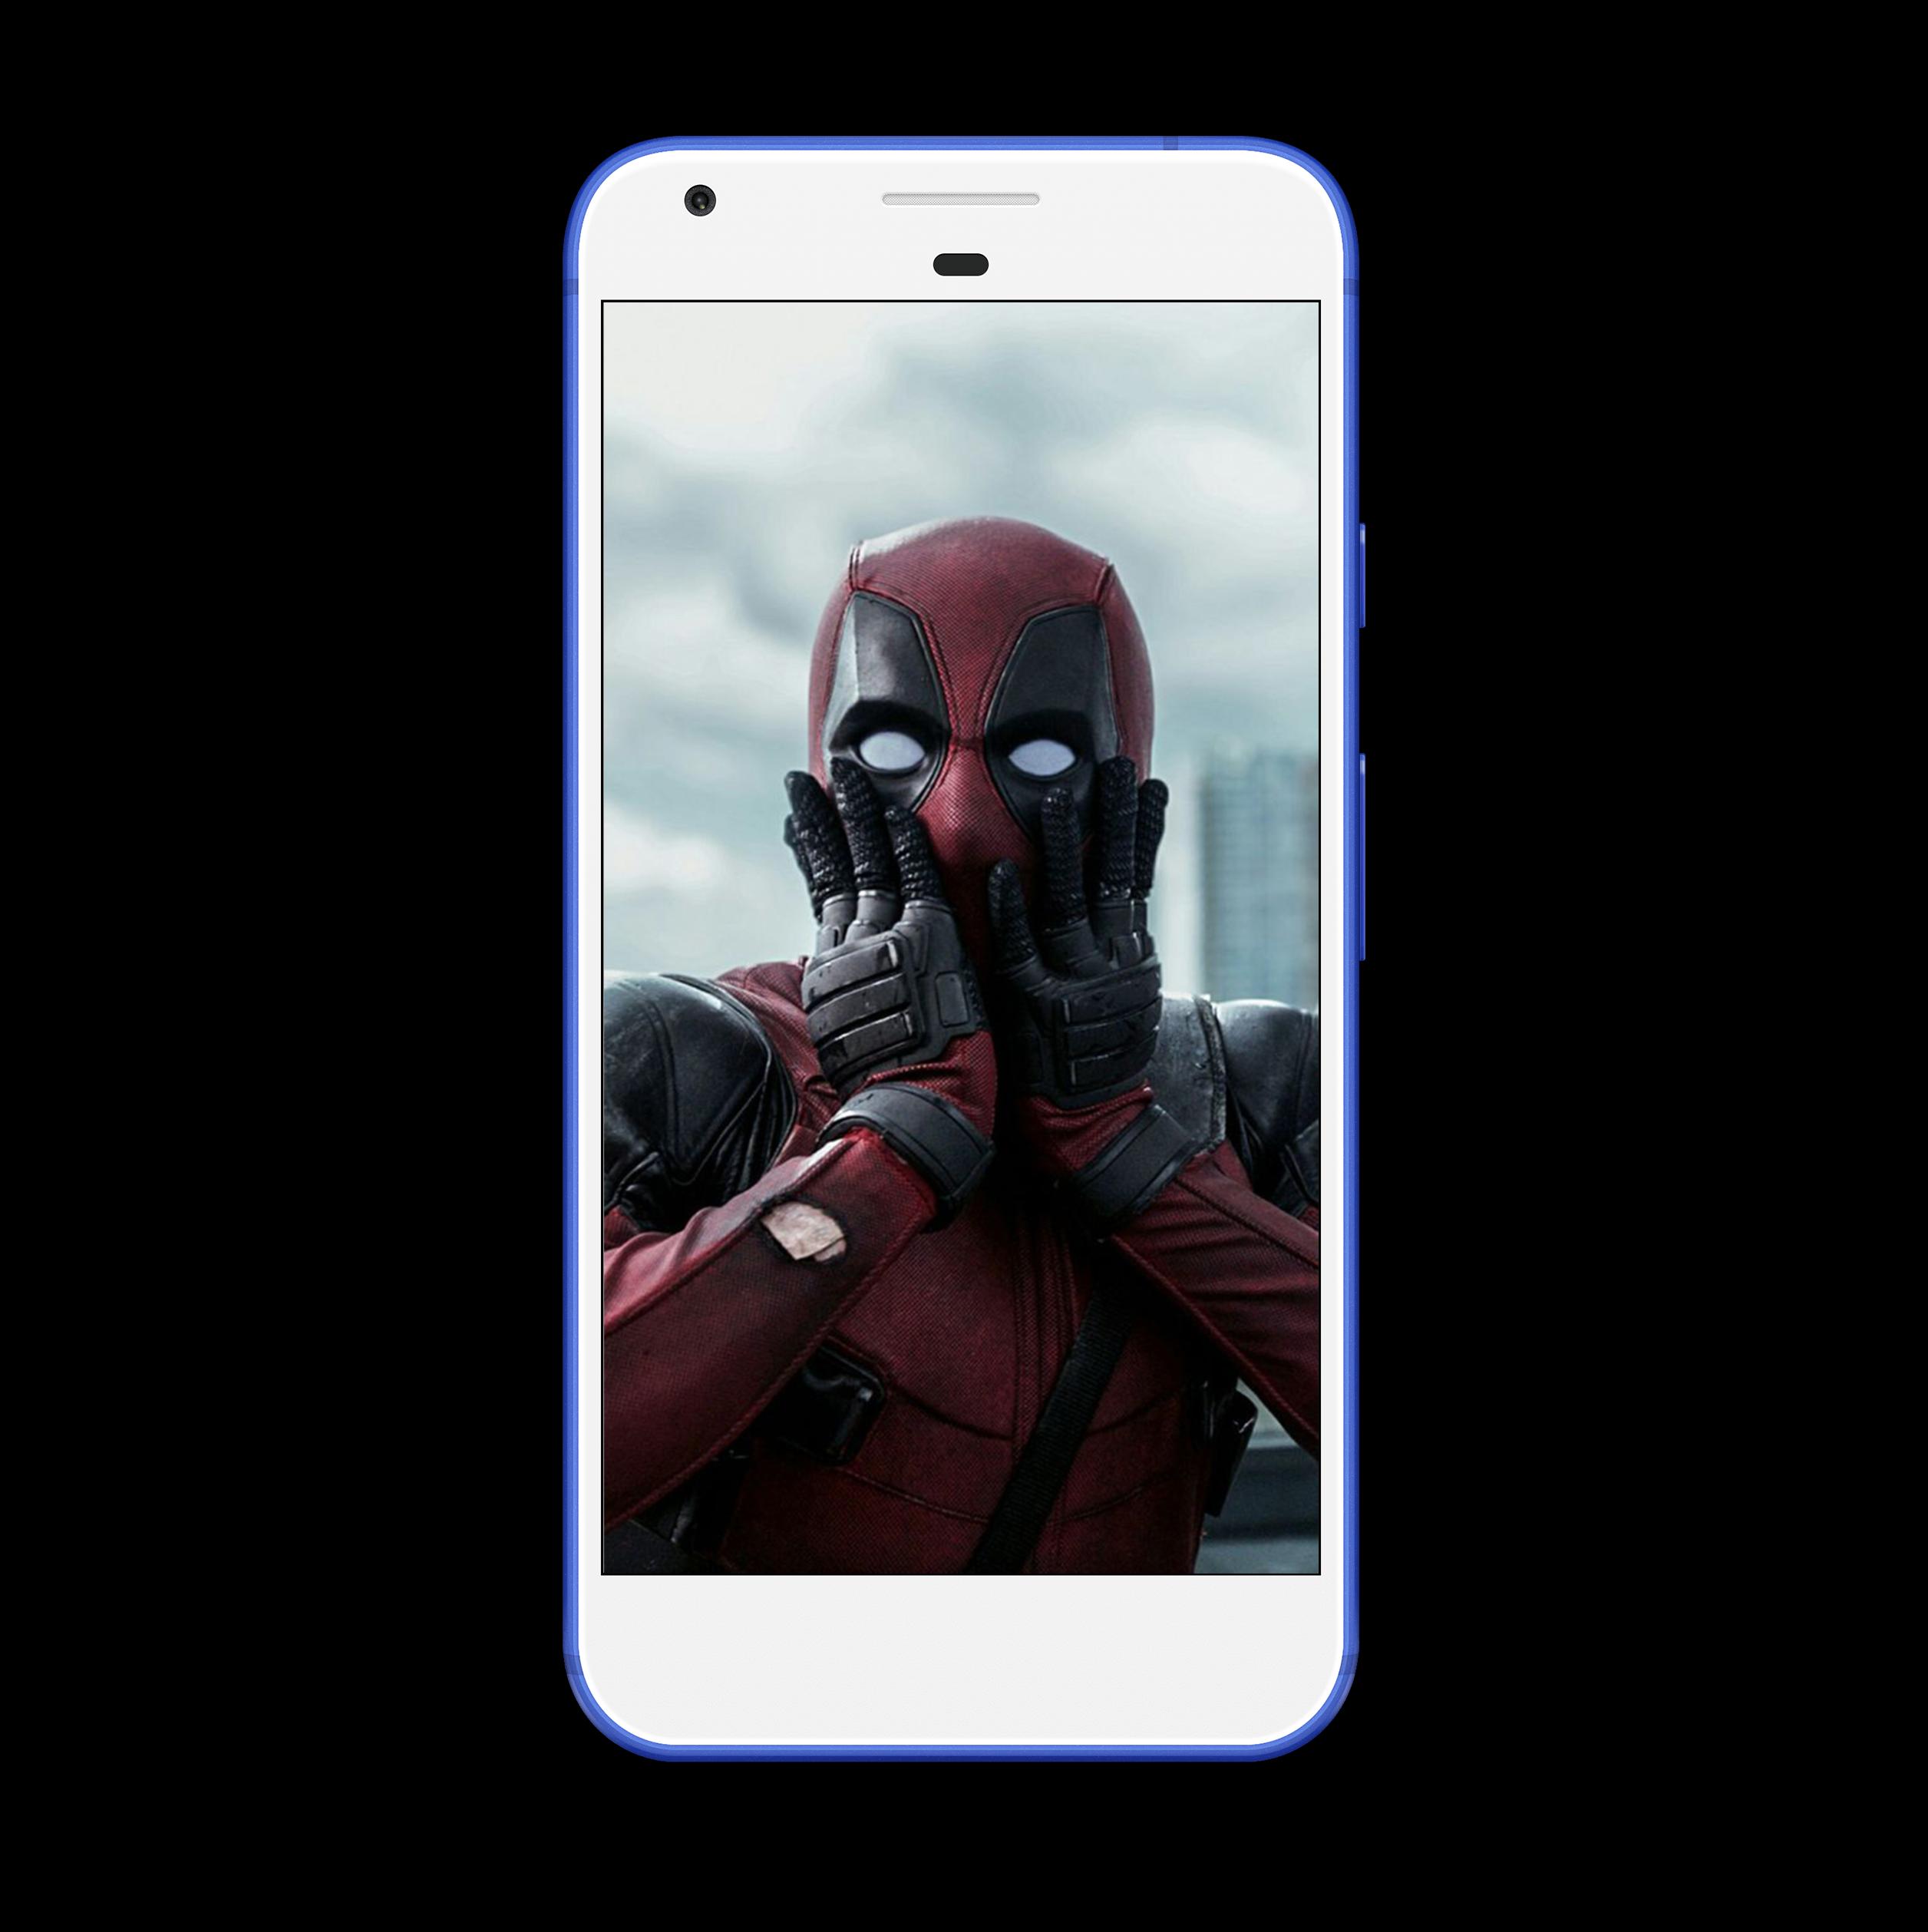 Deadpool Wallpaper Hd 4k For Android Apk Download